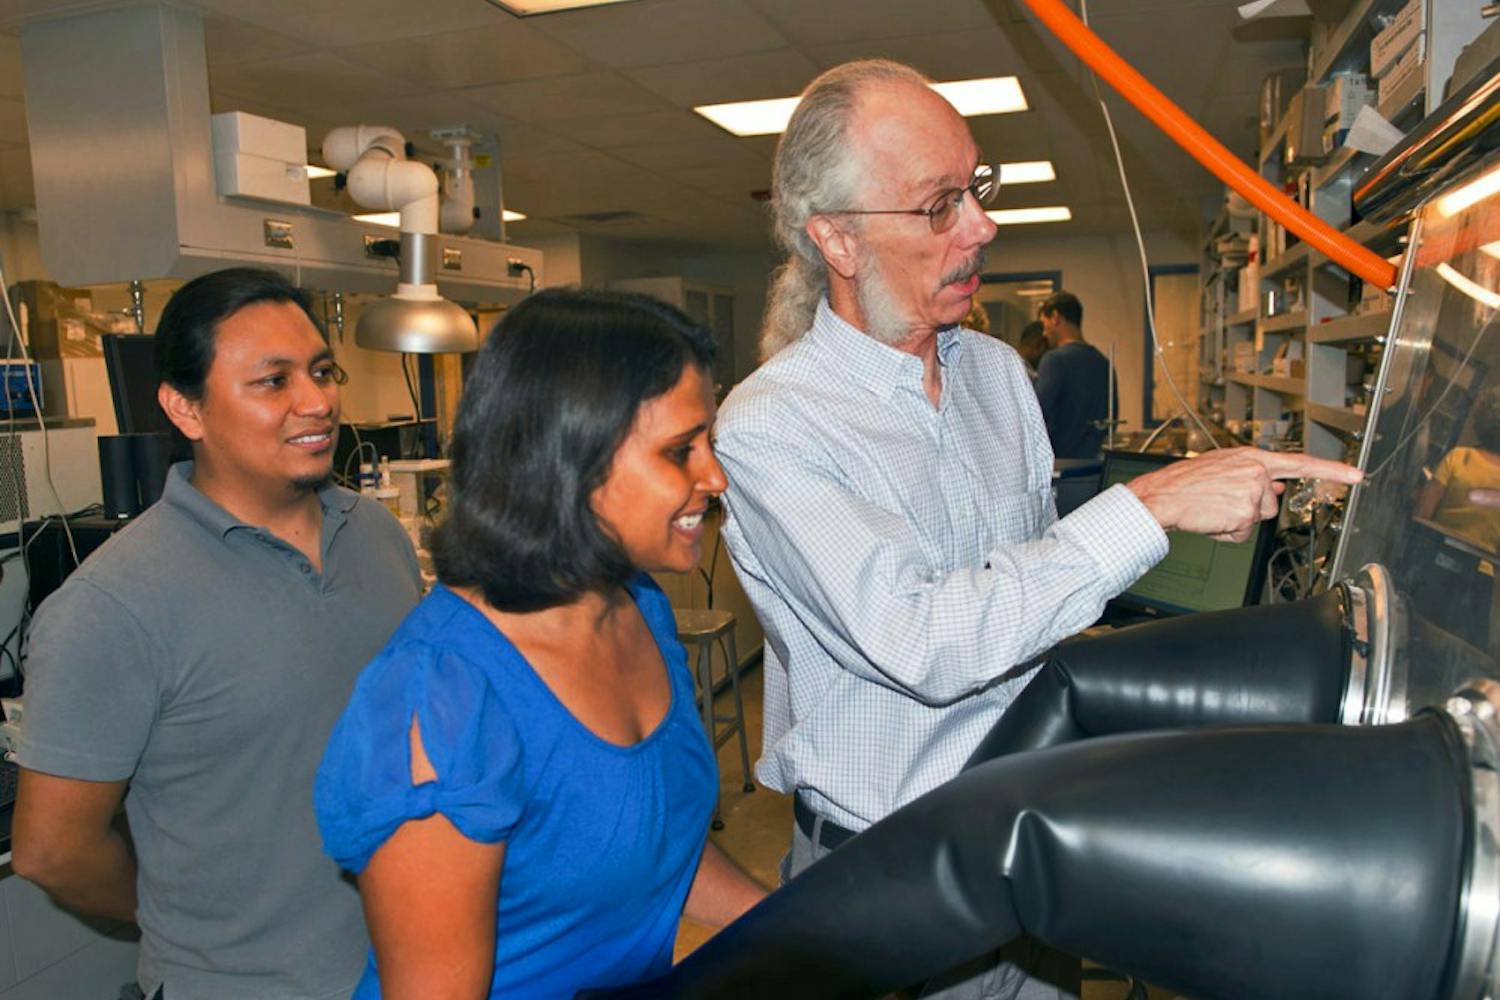 ASU researchers Dan Buttry (right) and coworkers Helme Castro (left) and Poonam Singh work in the lab.
(Photo Courtesy of ASU News/Photo by Mary Zhu)